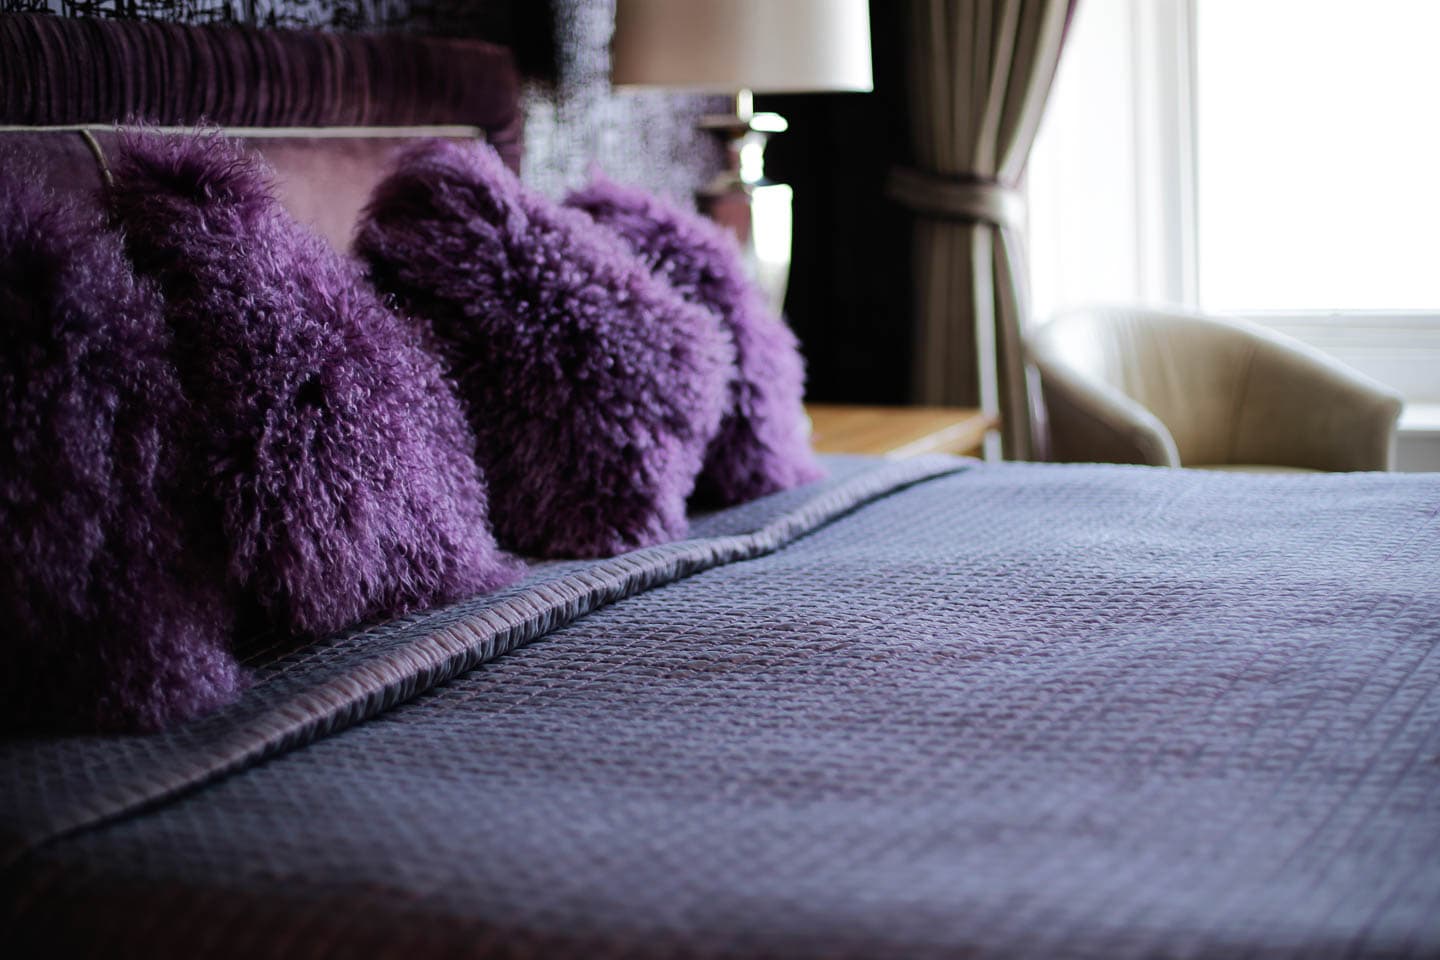 dark purple pillows and blanket on a bed